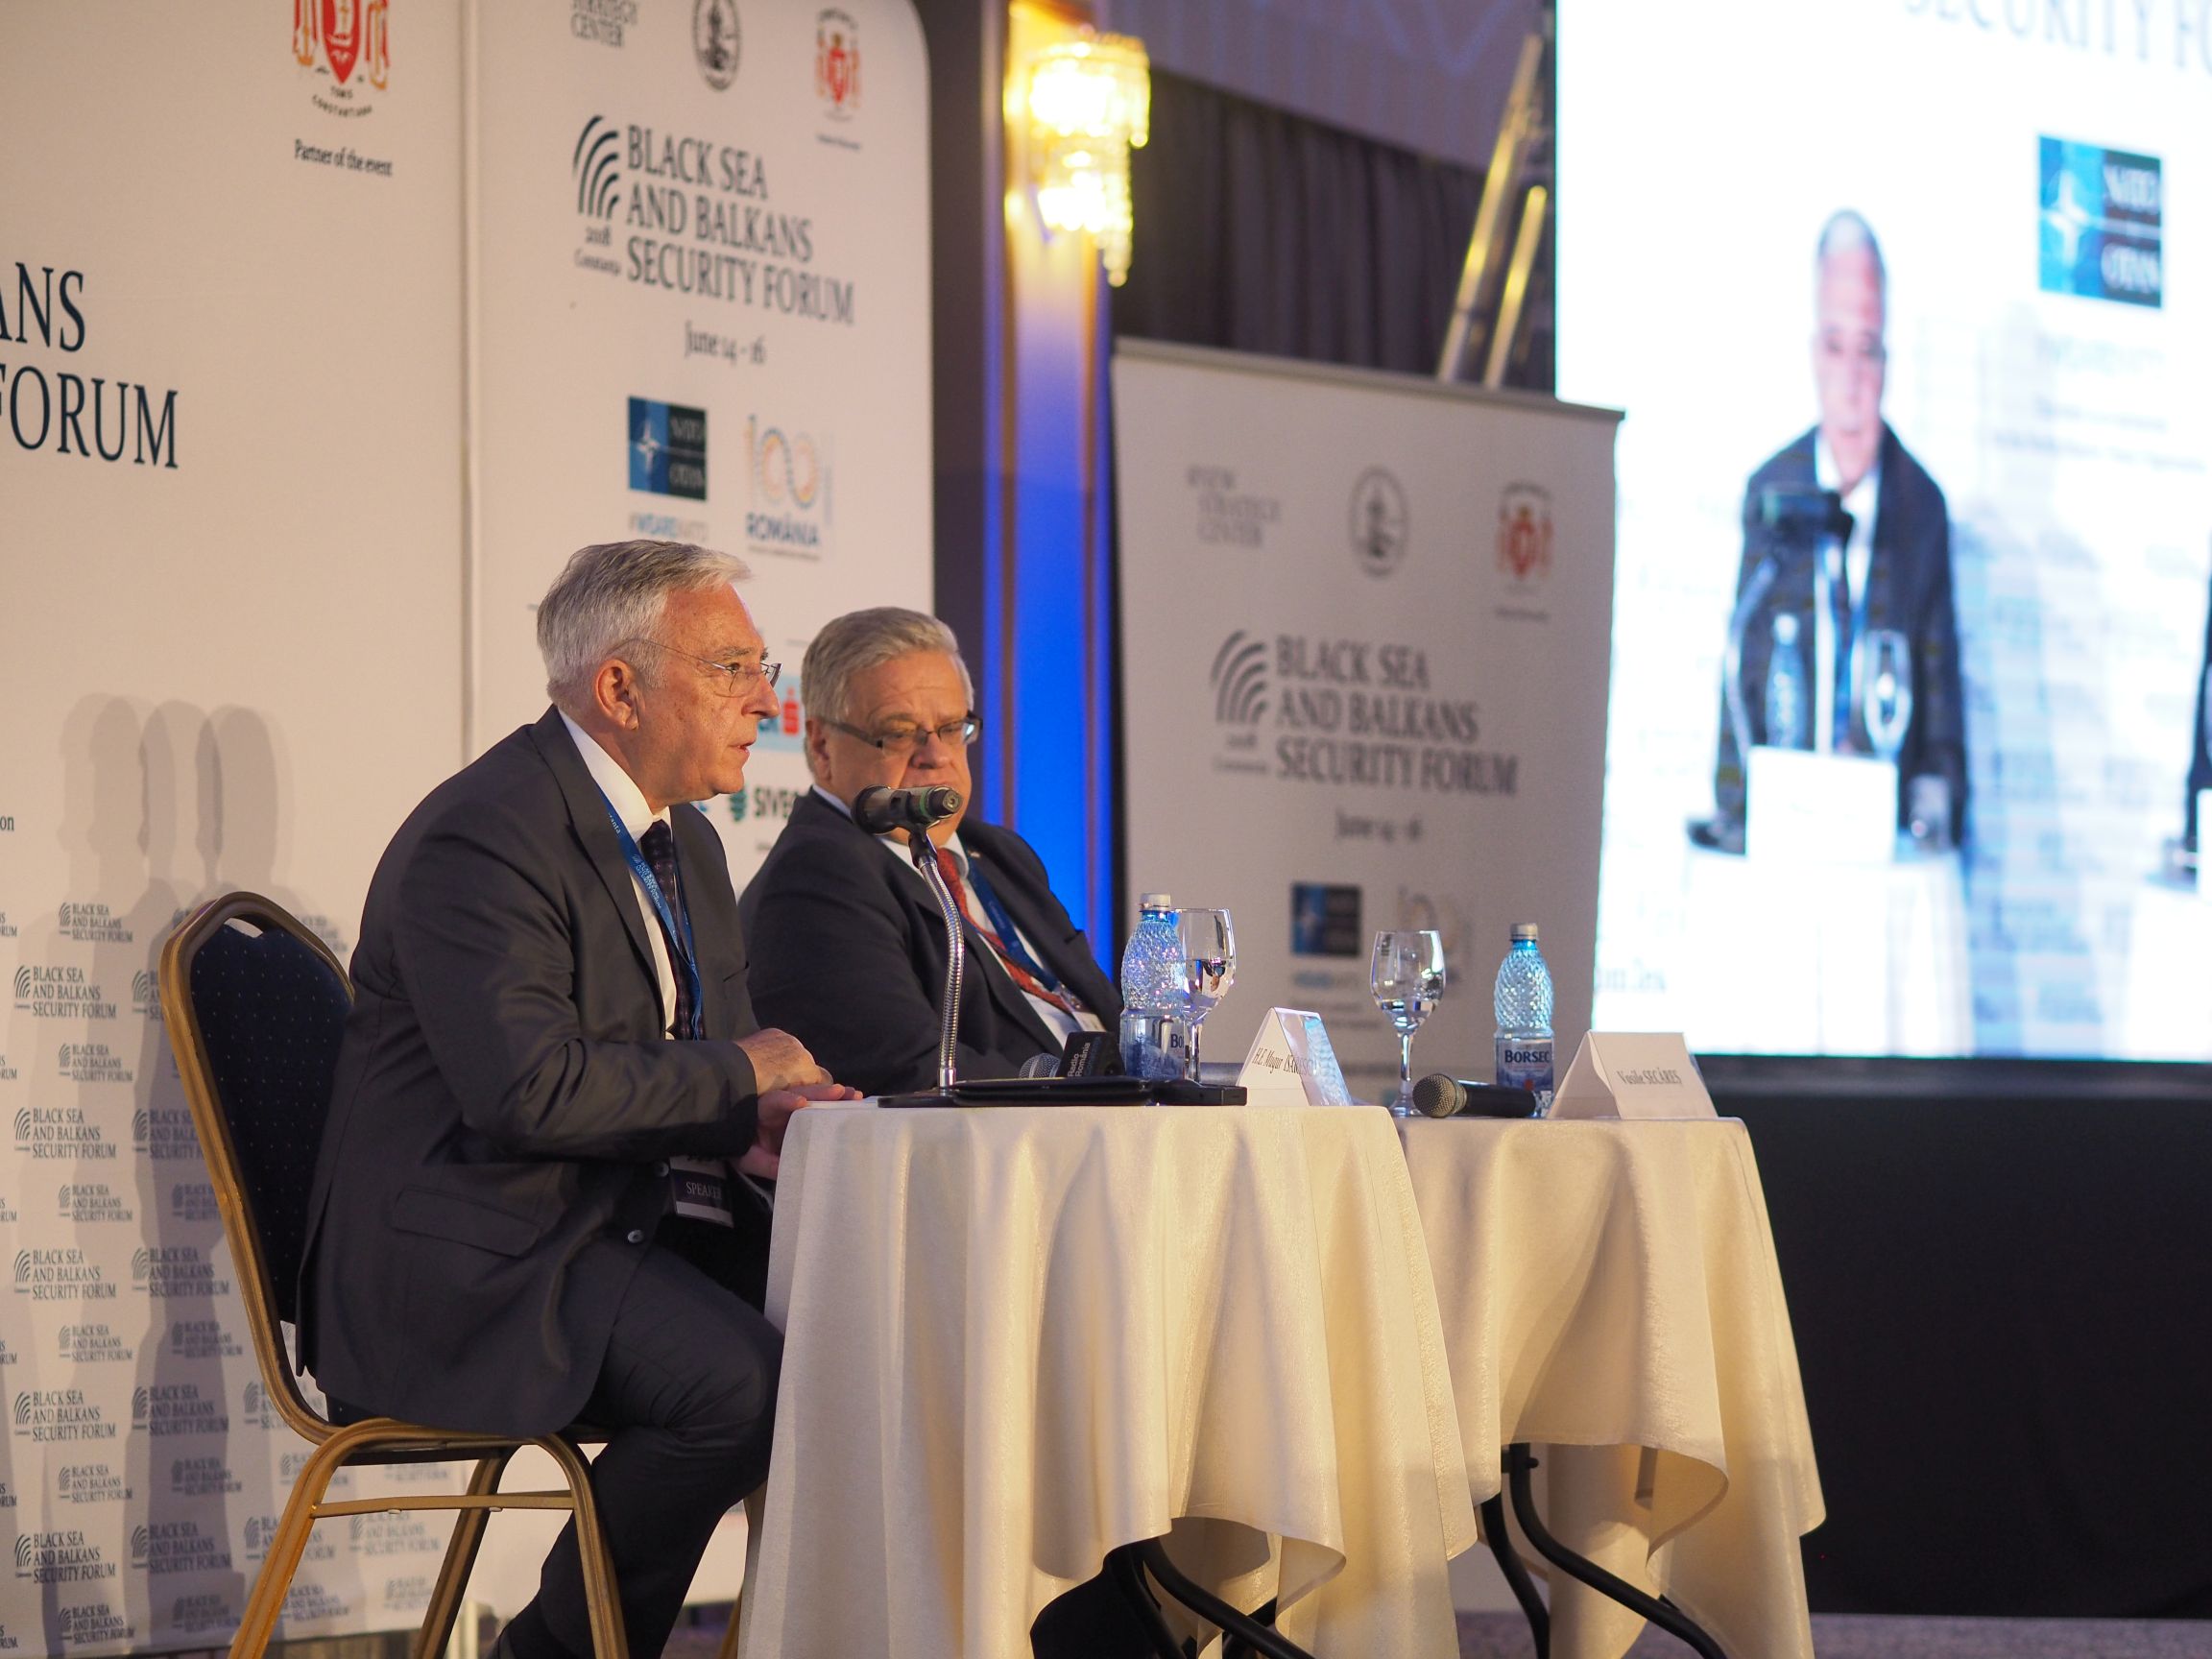 Black Sea and Balkans Security Forum 2018 – Day 1